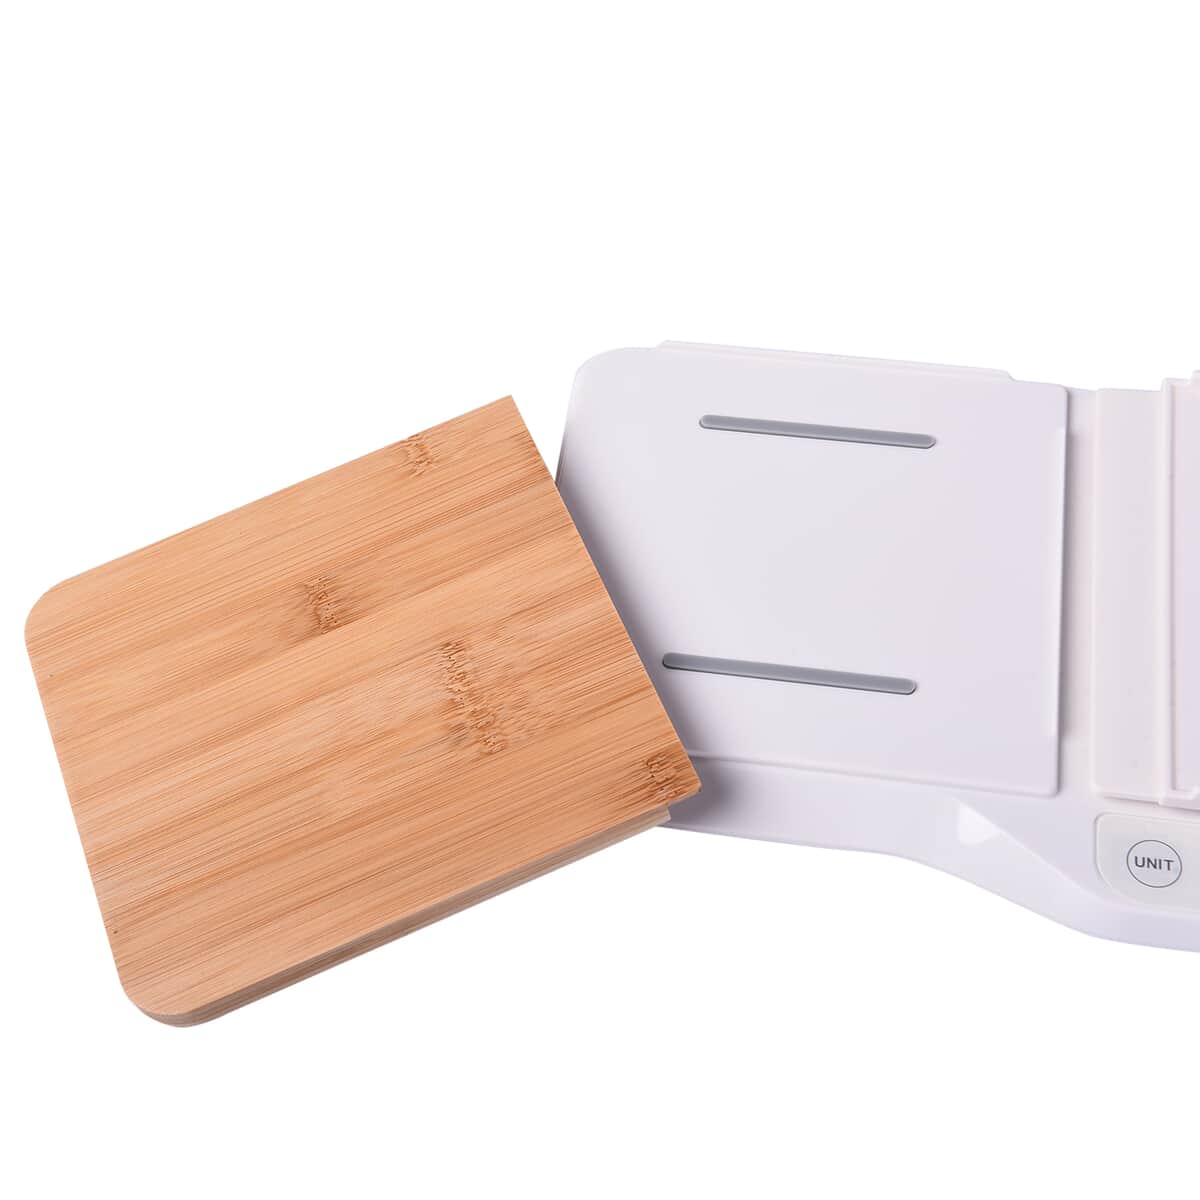 Cutting Board with Digital Electronic Household Kitchen Scale (2xAAA Battery Not Included) image number 5